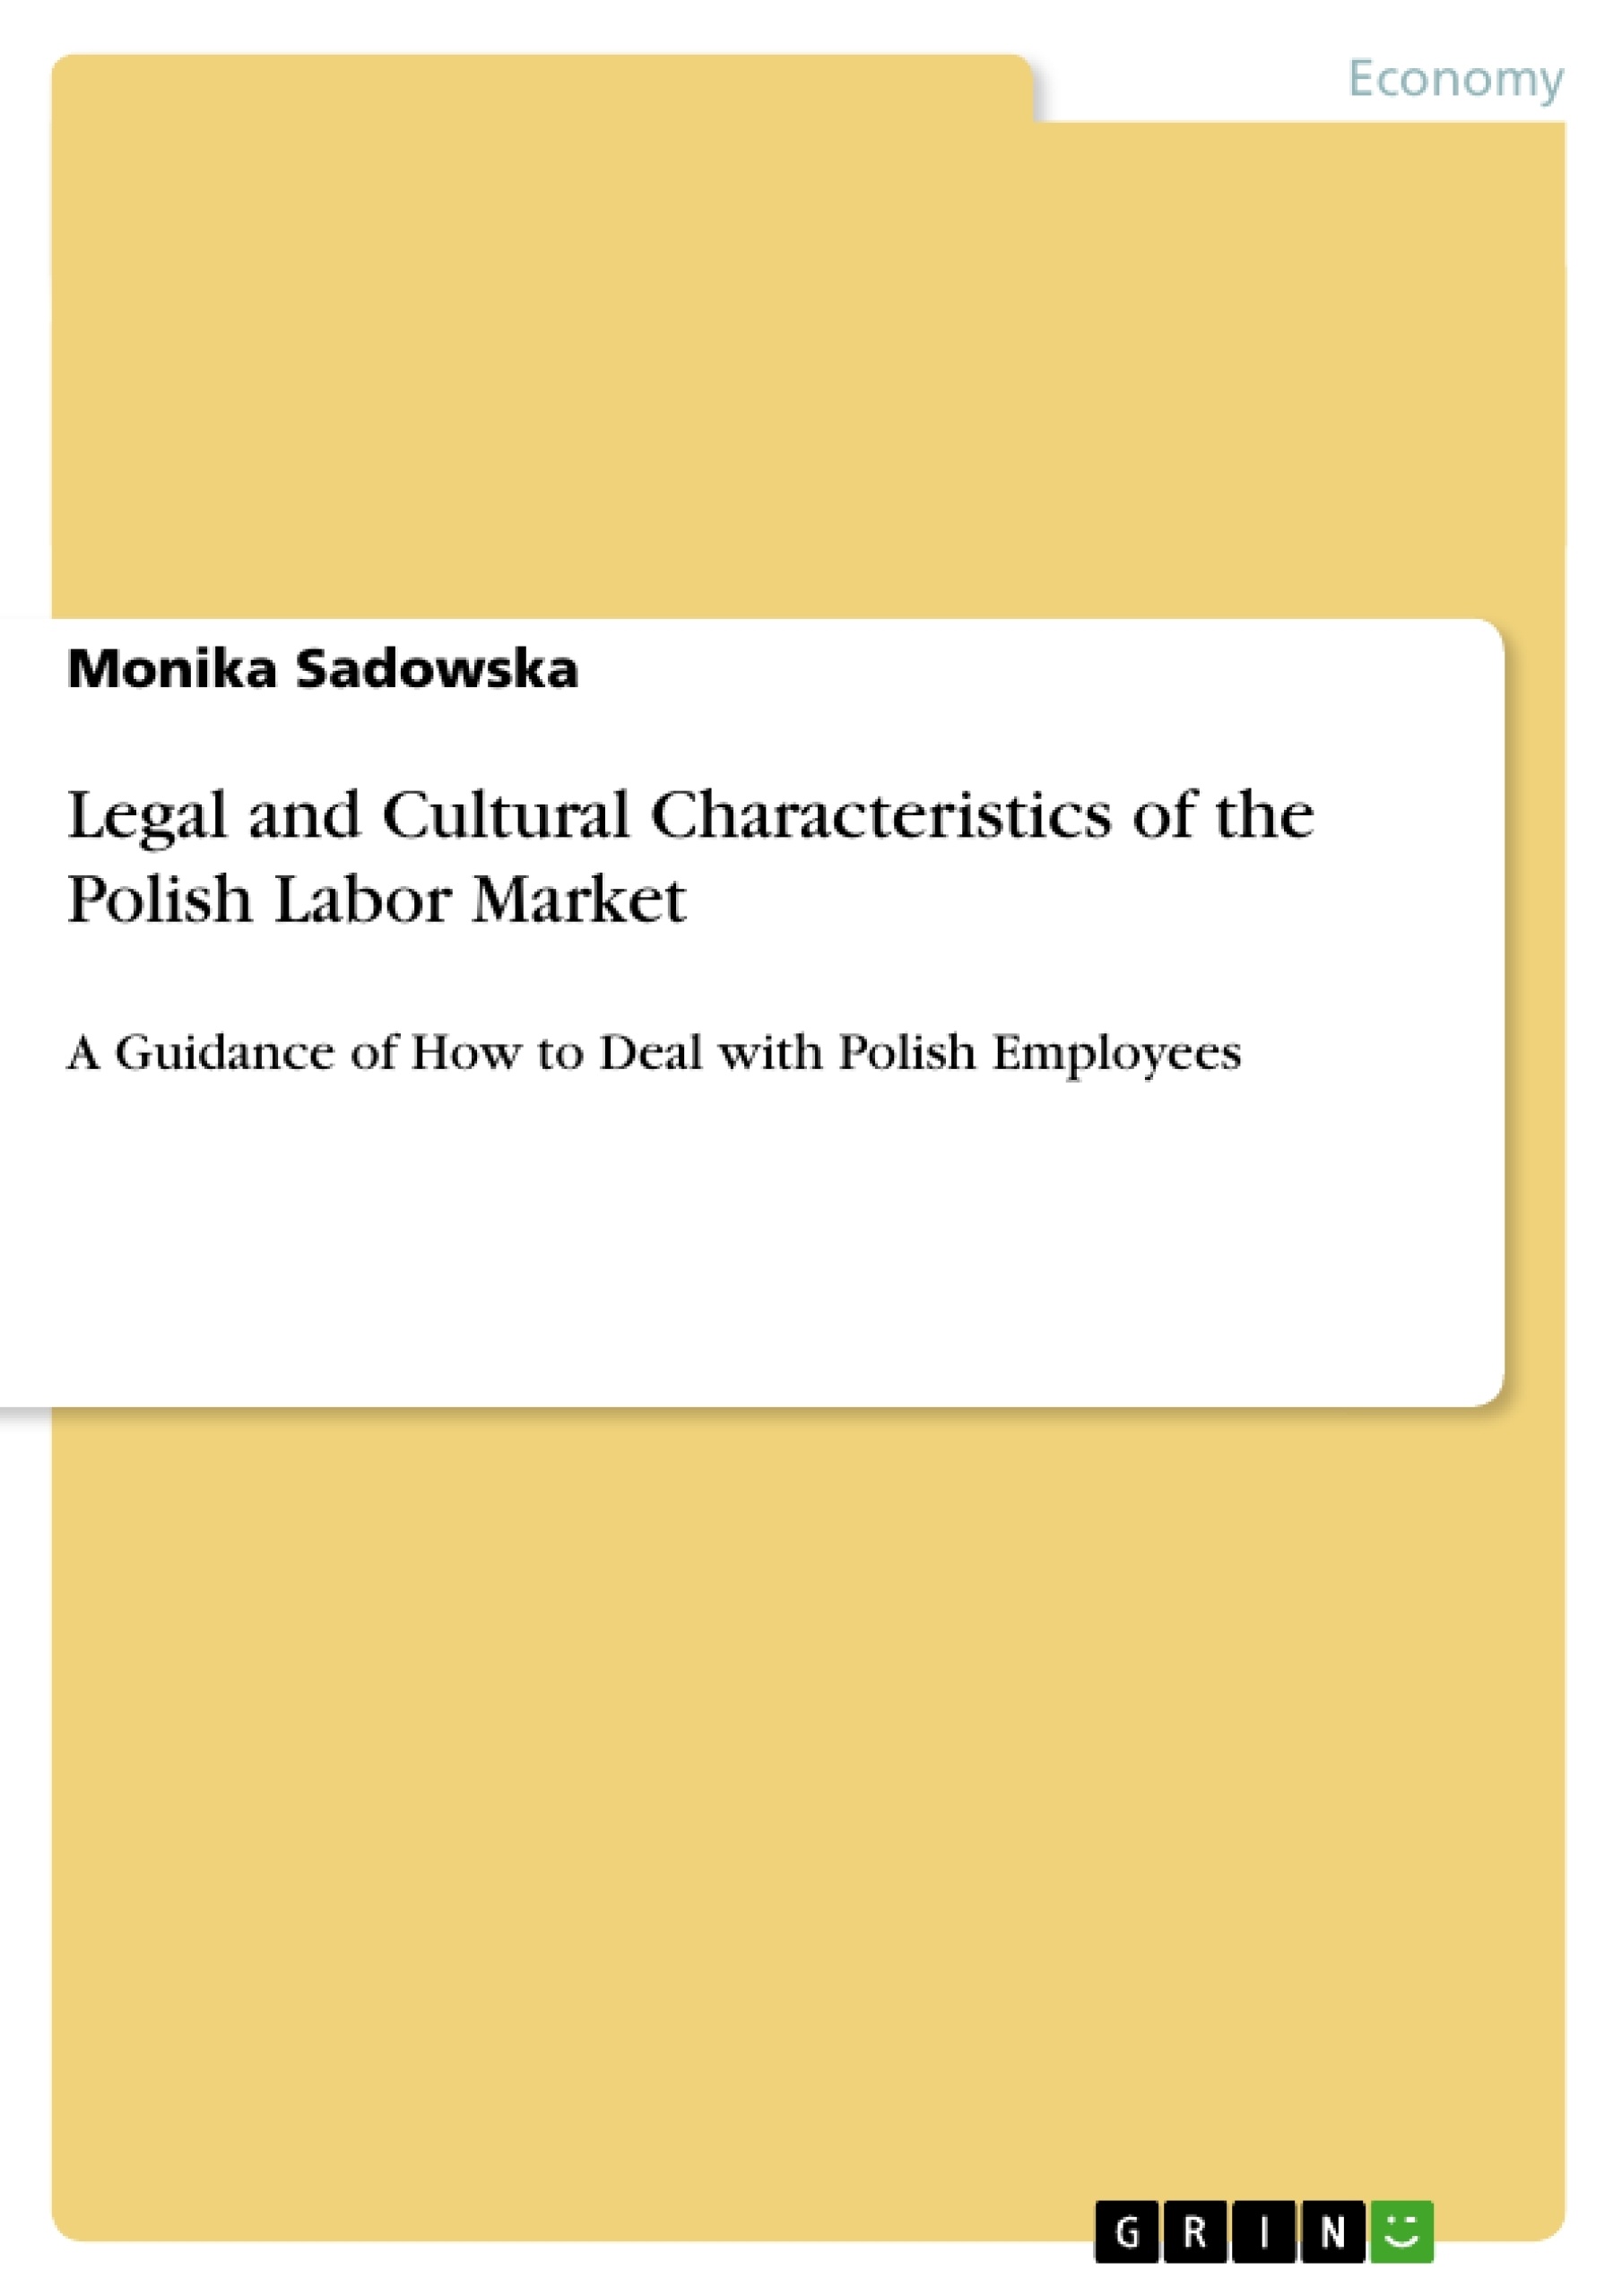 Title: Legal and Cultural Characteristics of the Polish Labor Market